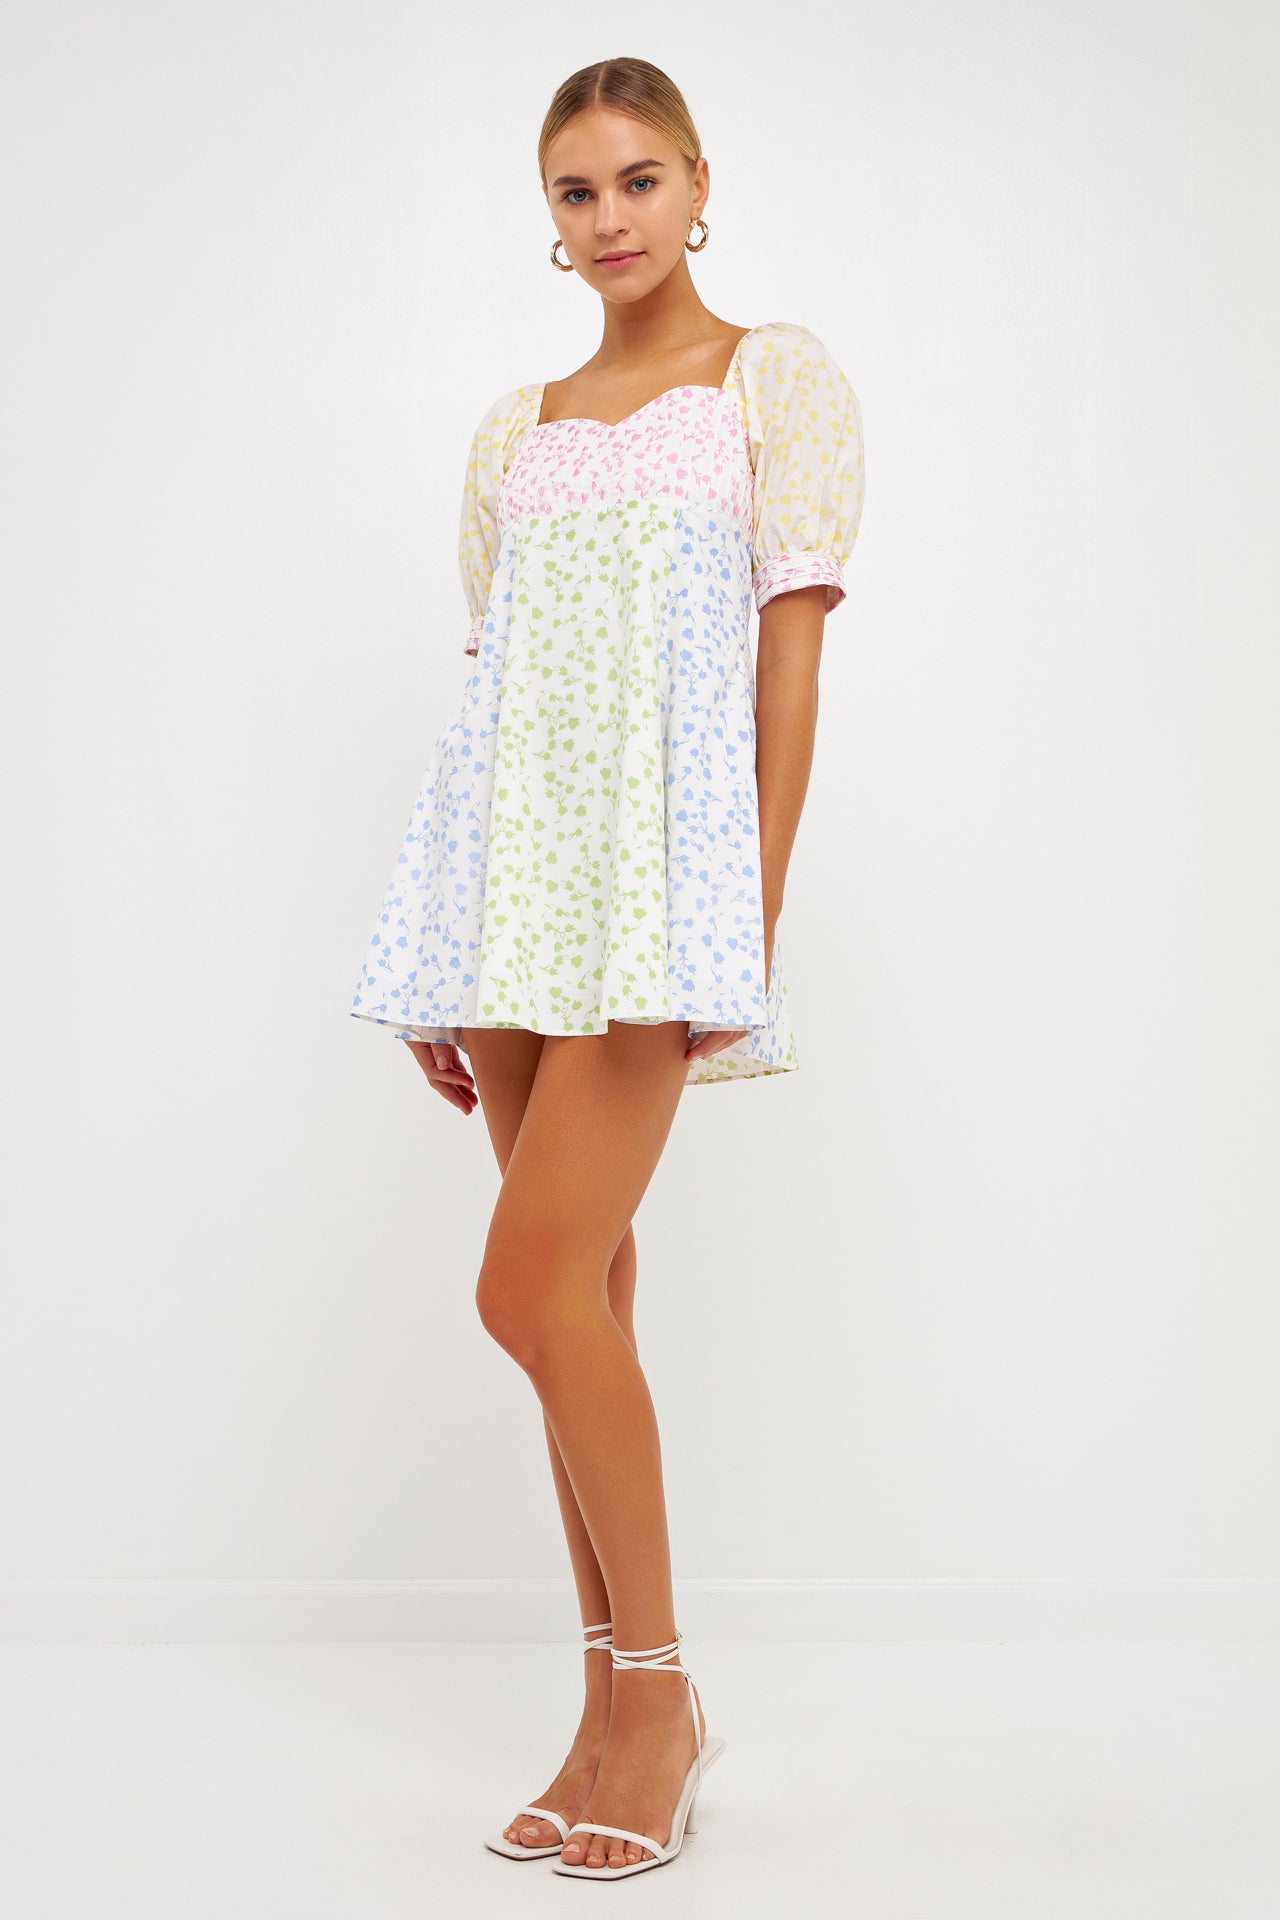 ENGLISH FACTORY - Multi Floral Print Mini Dress - DRESSES available at Objectrare